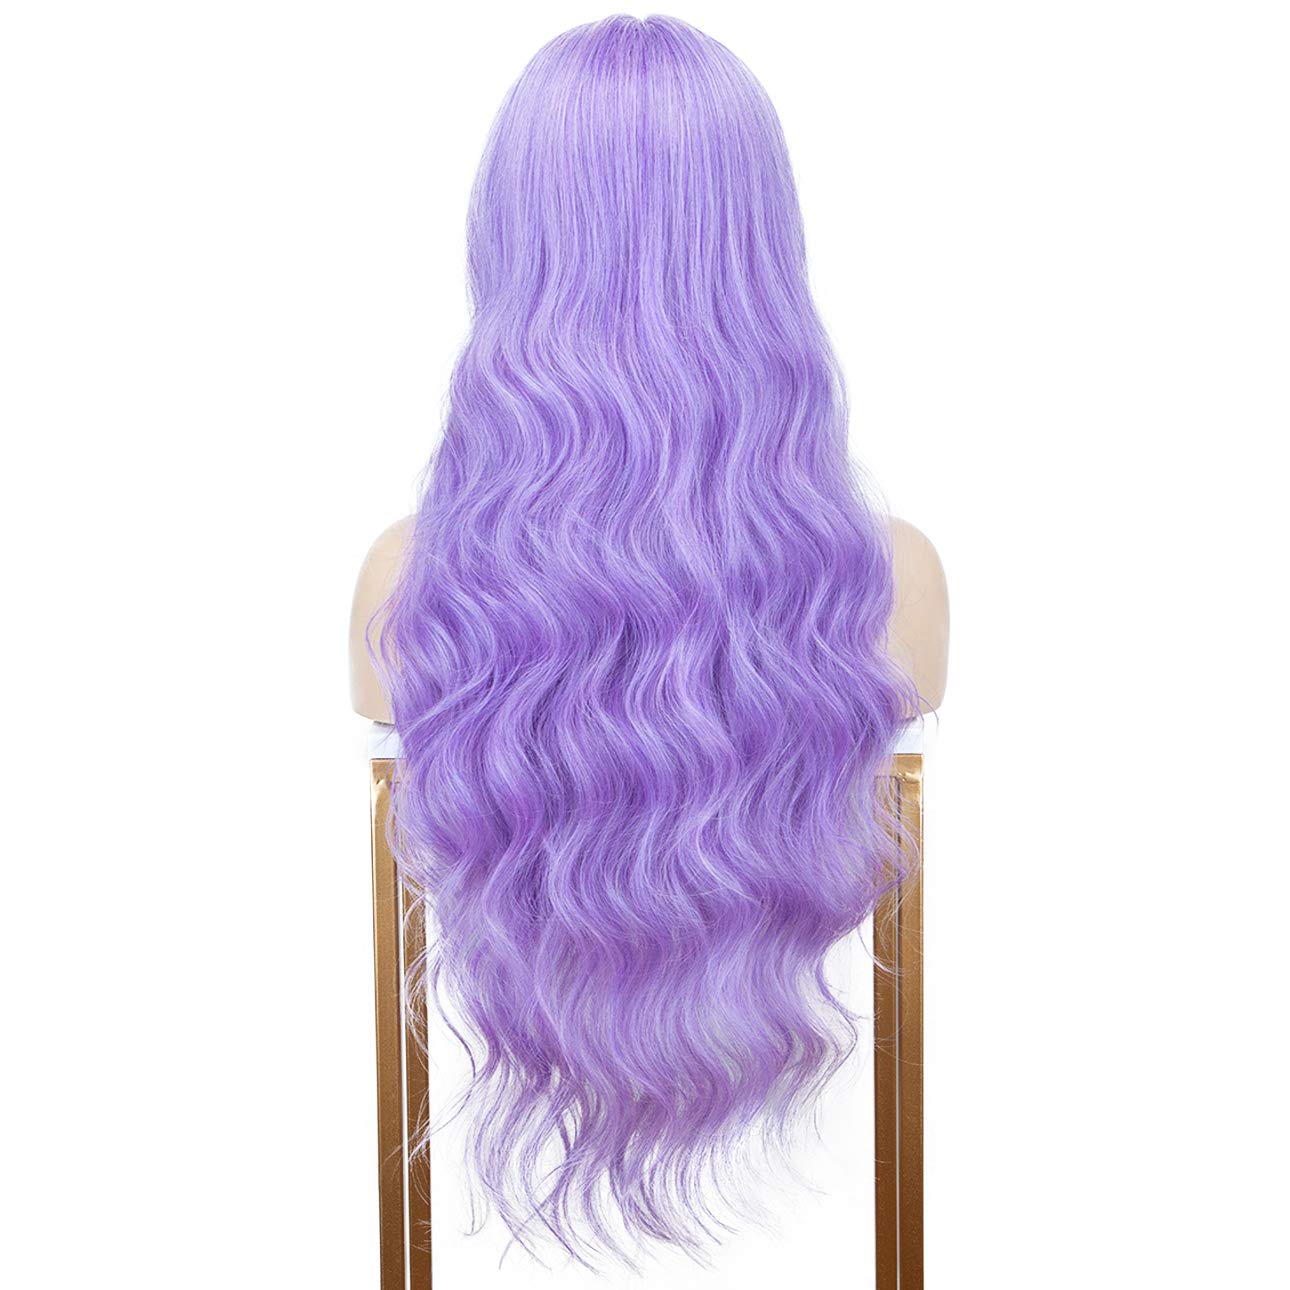 Light Purple Lace Front Wig with L Part Deep Middle Parting Wavy Long Synthetic Wigs for Women 28 Inches Heat Resistant for Cosply-0